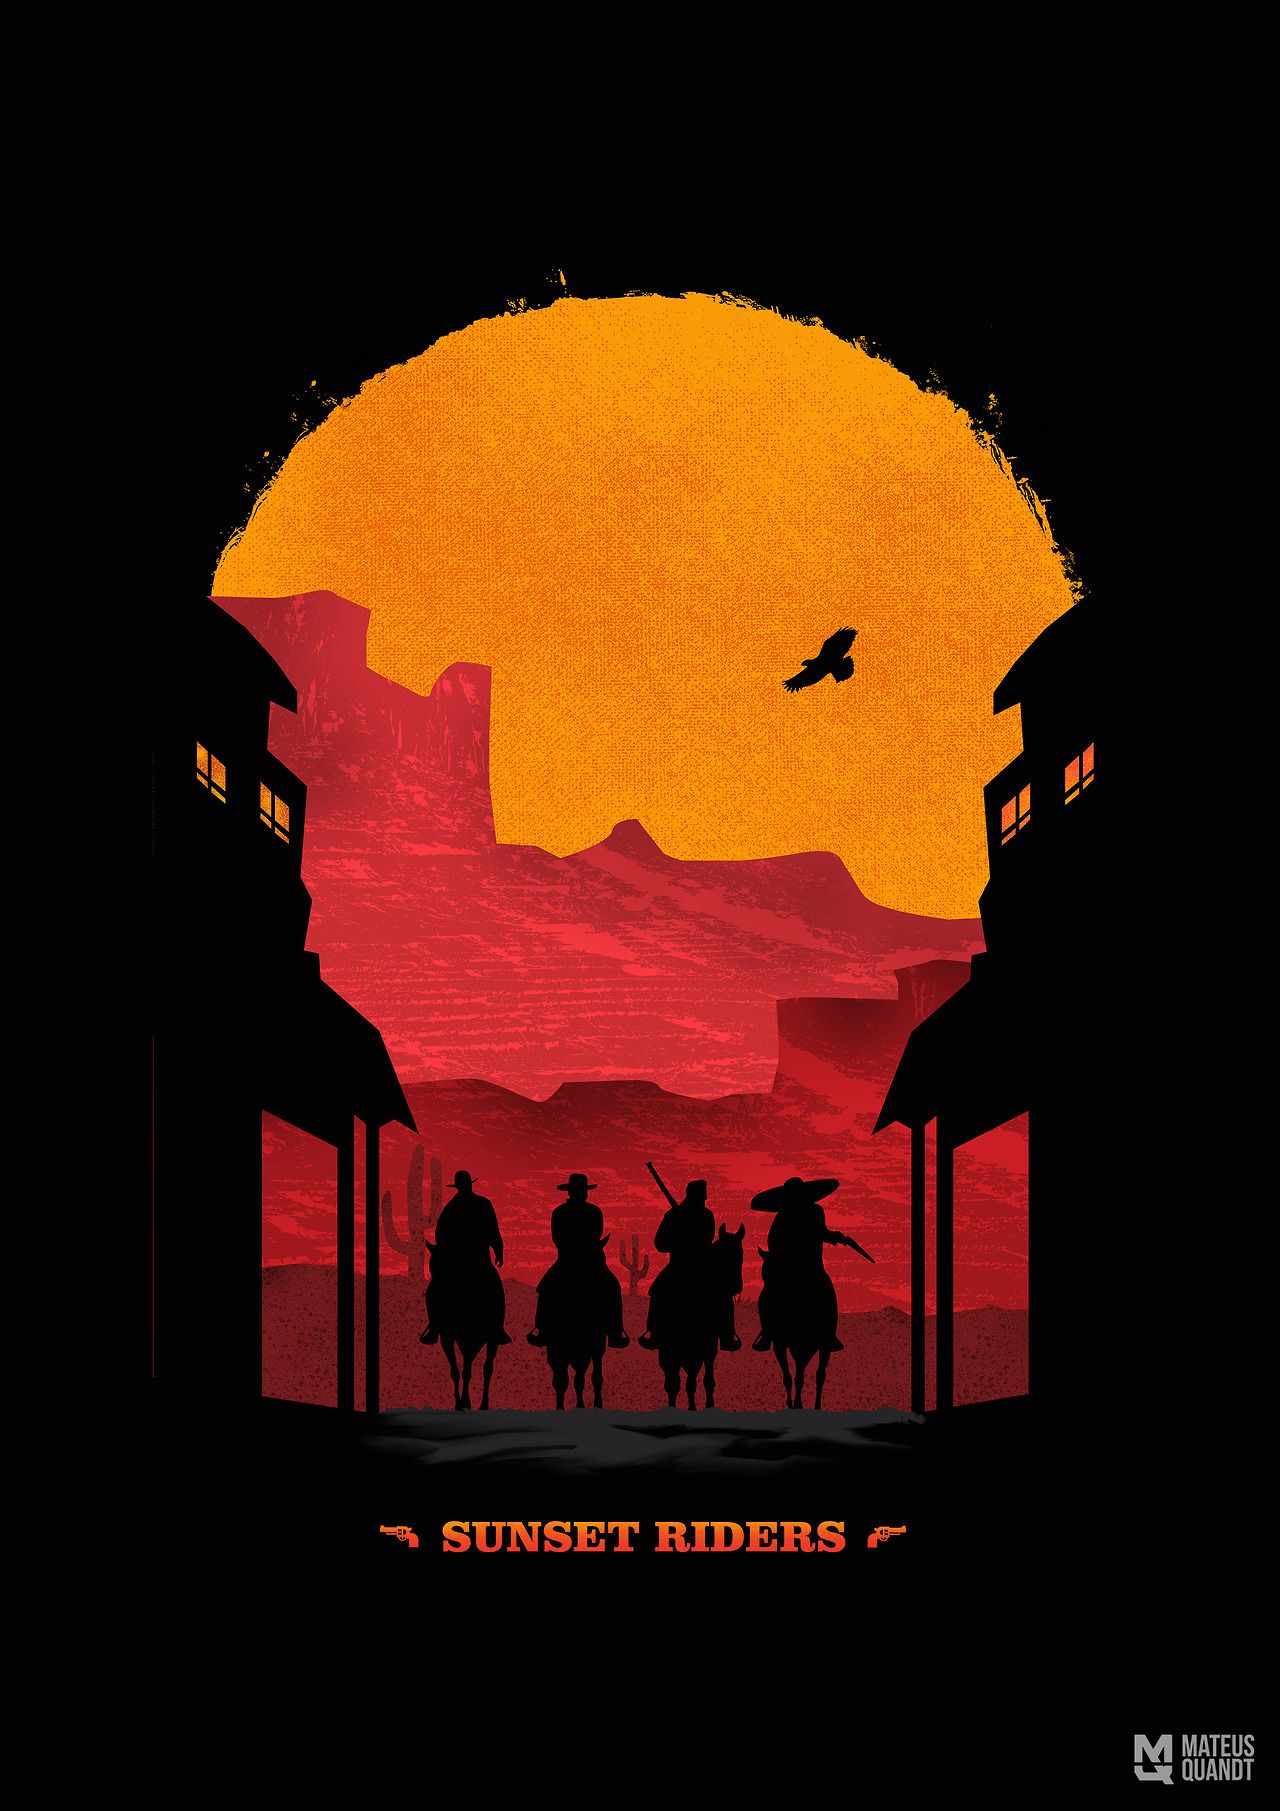 Game, Sunset Riders Artista: Mateus Dalethese. Red dead redemption artwork, Red dead redemption art, Red dead redemption